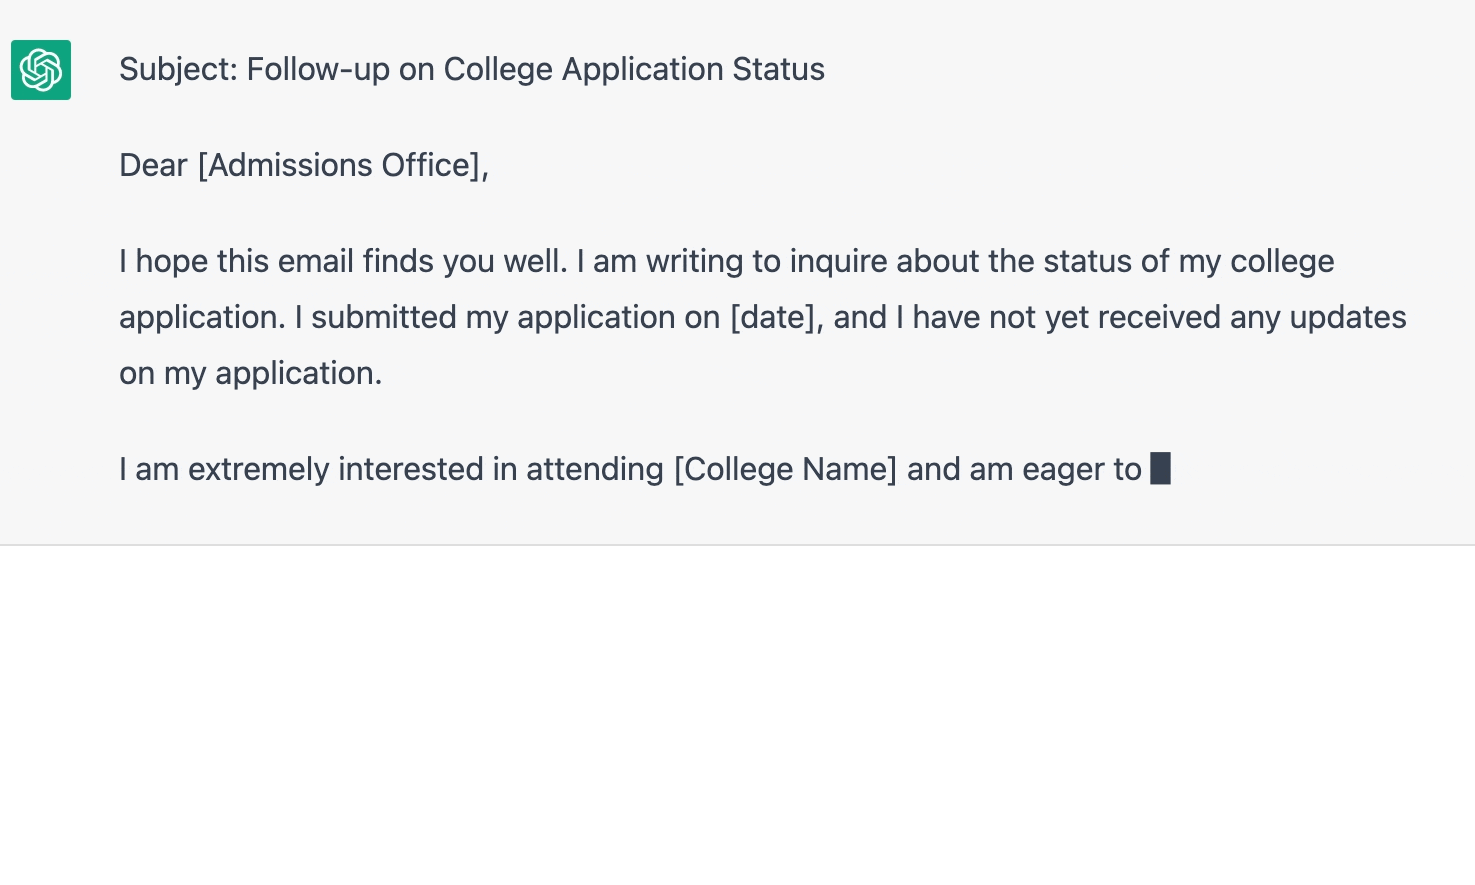 ChatGPT prompt about writing a follow-up on college application status